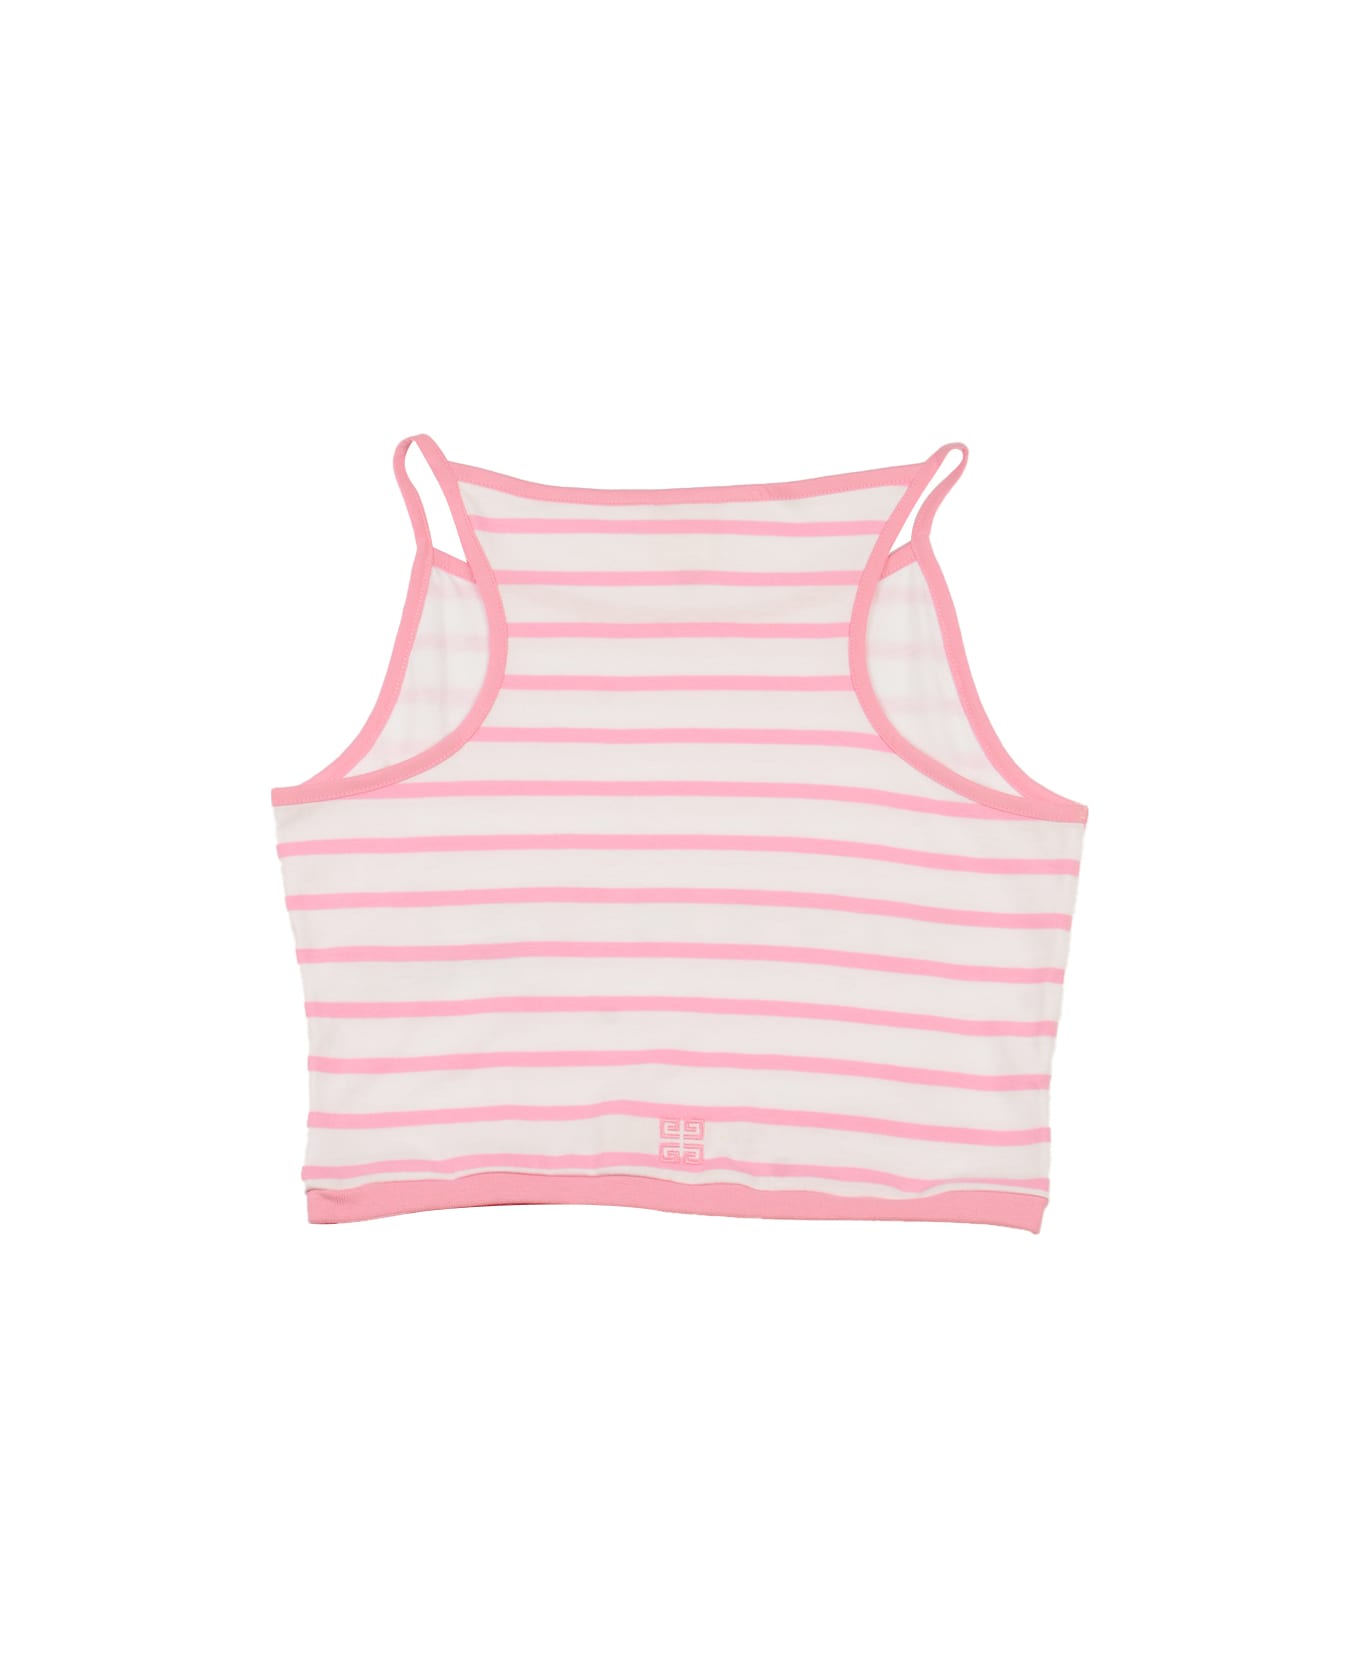 Givenchy Logo Embroidered Stripe Top - White/Pink トップス